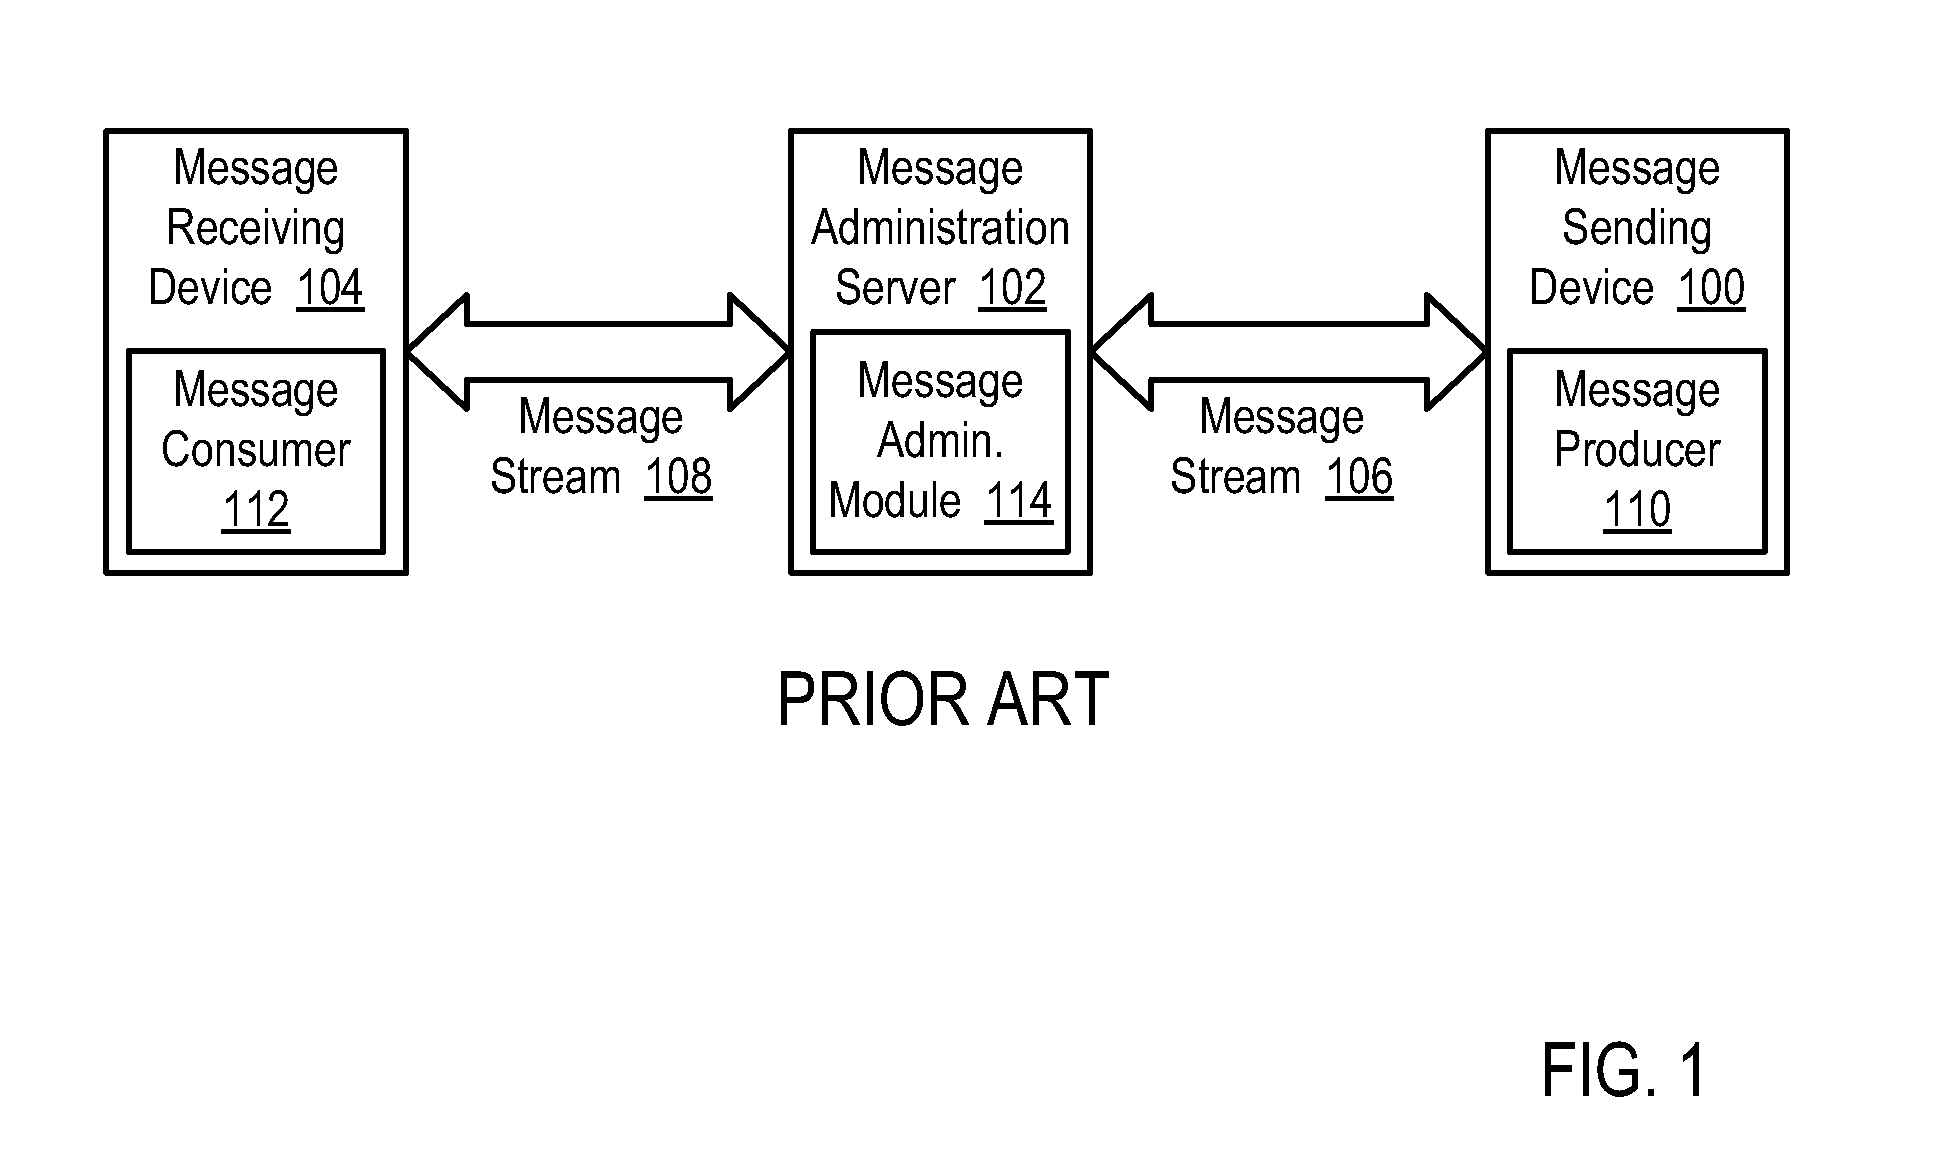 Synchronizing an active feed adapter and a backup feed adapter in a high speed, low latency data communications environment